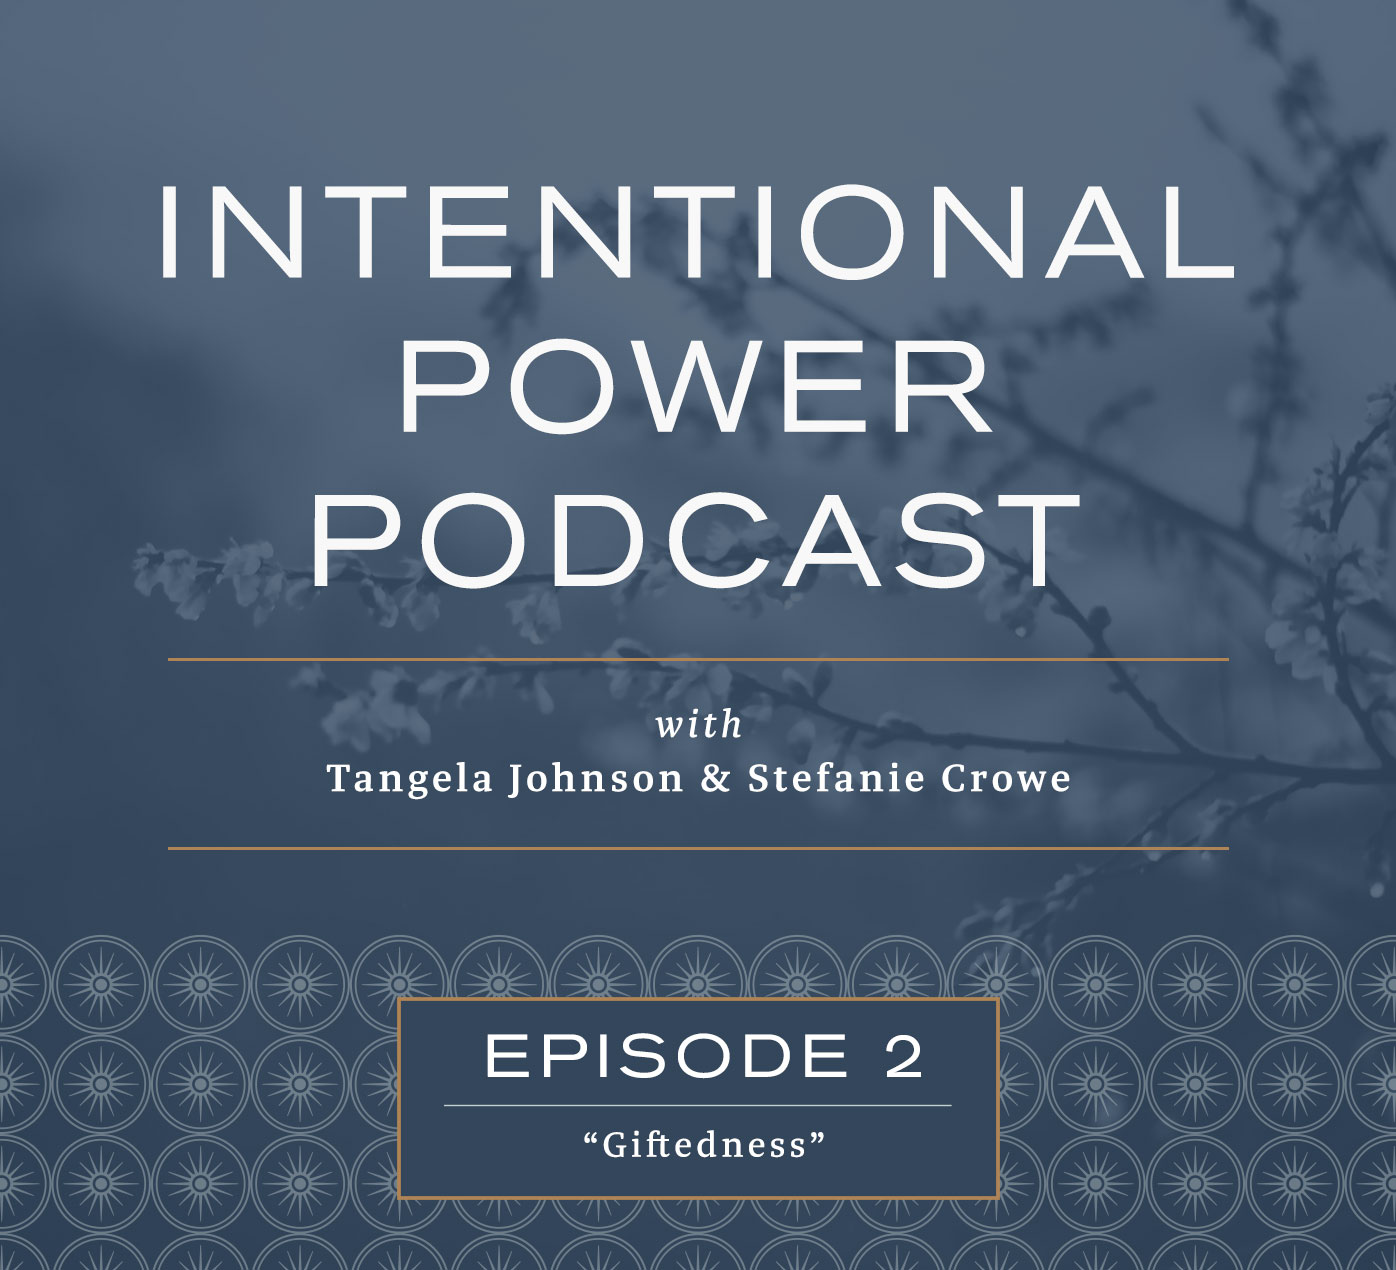 Intentional Power Podcast - Episode 2: Giftedness